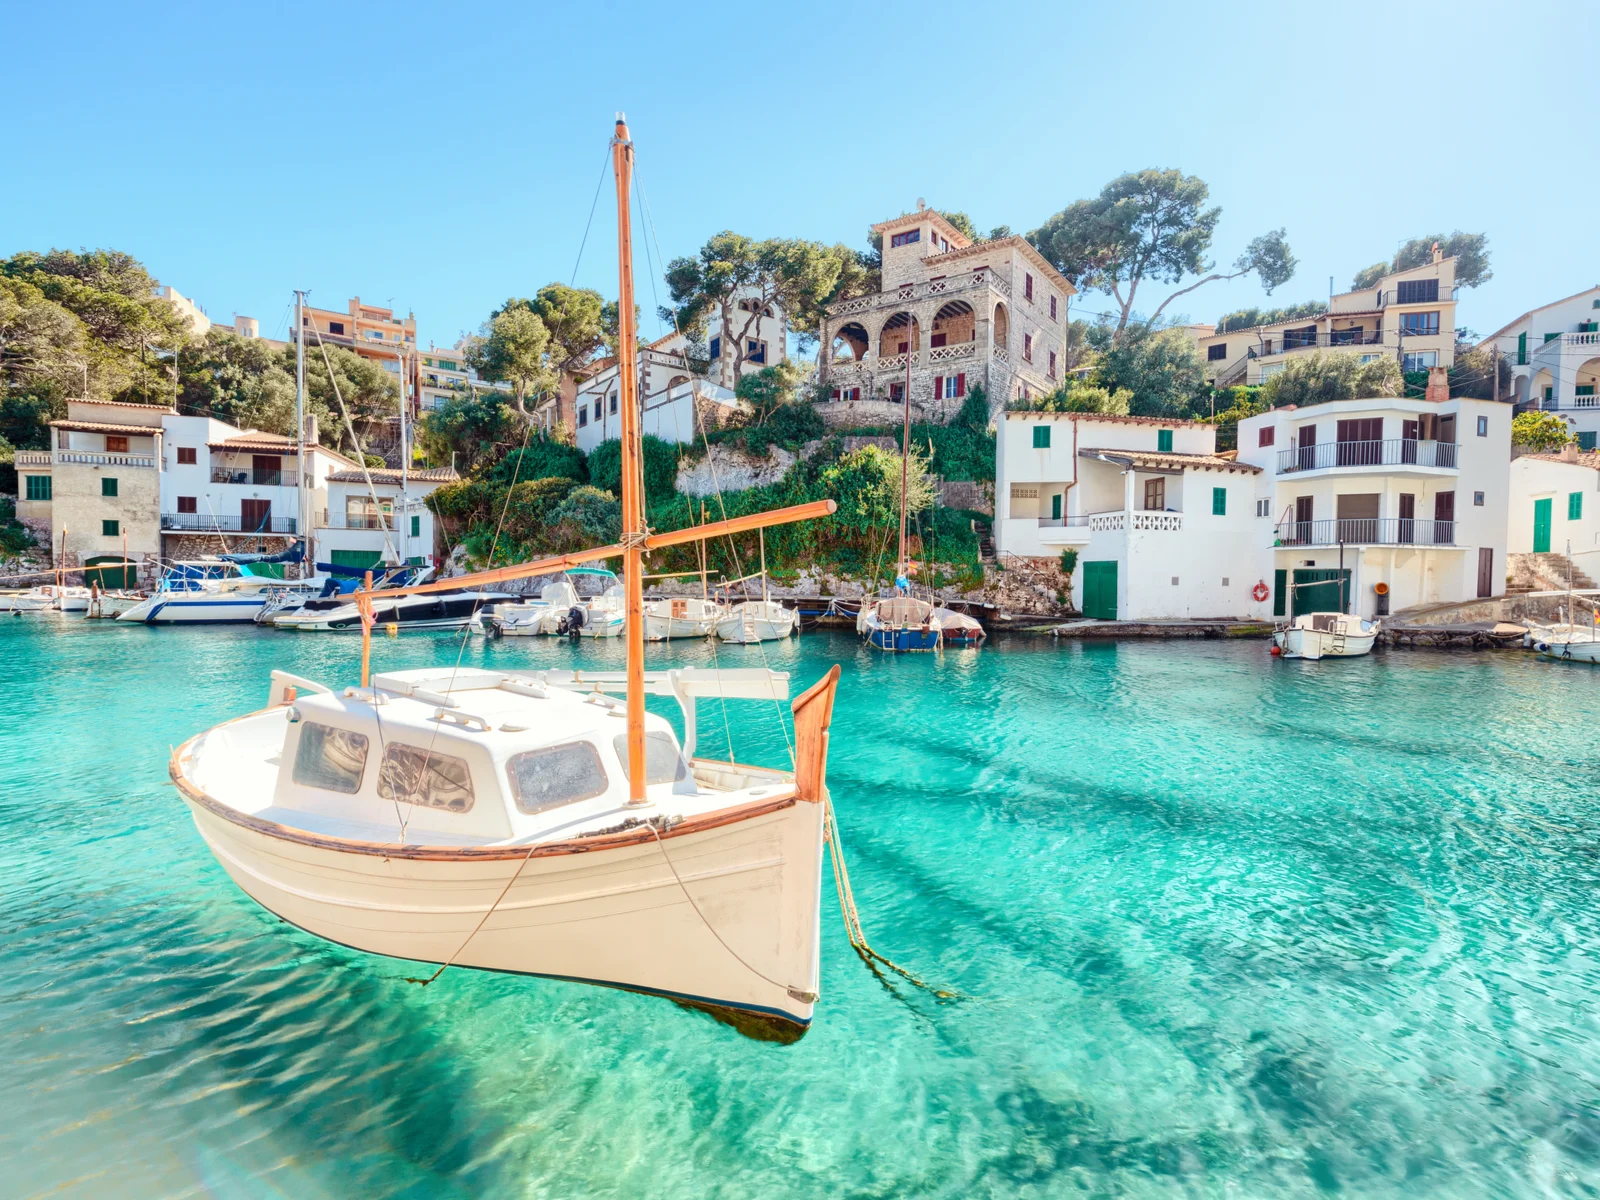 Boat that looks like it's floating at one of the best island vacations destinations, Mallorca Spain